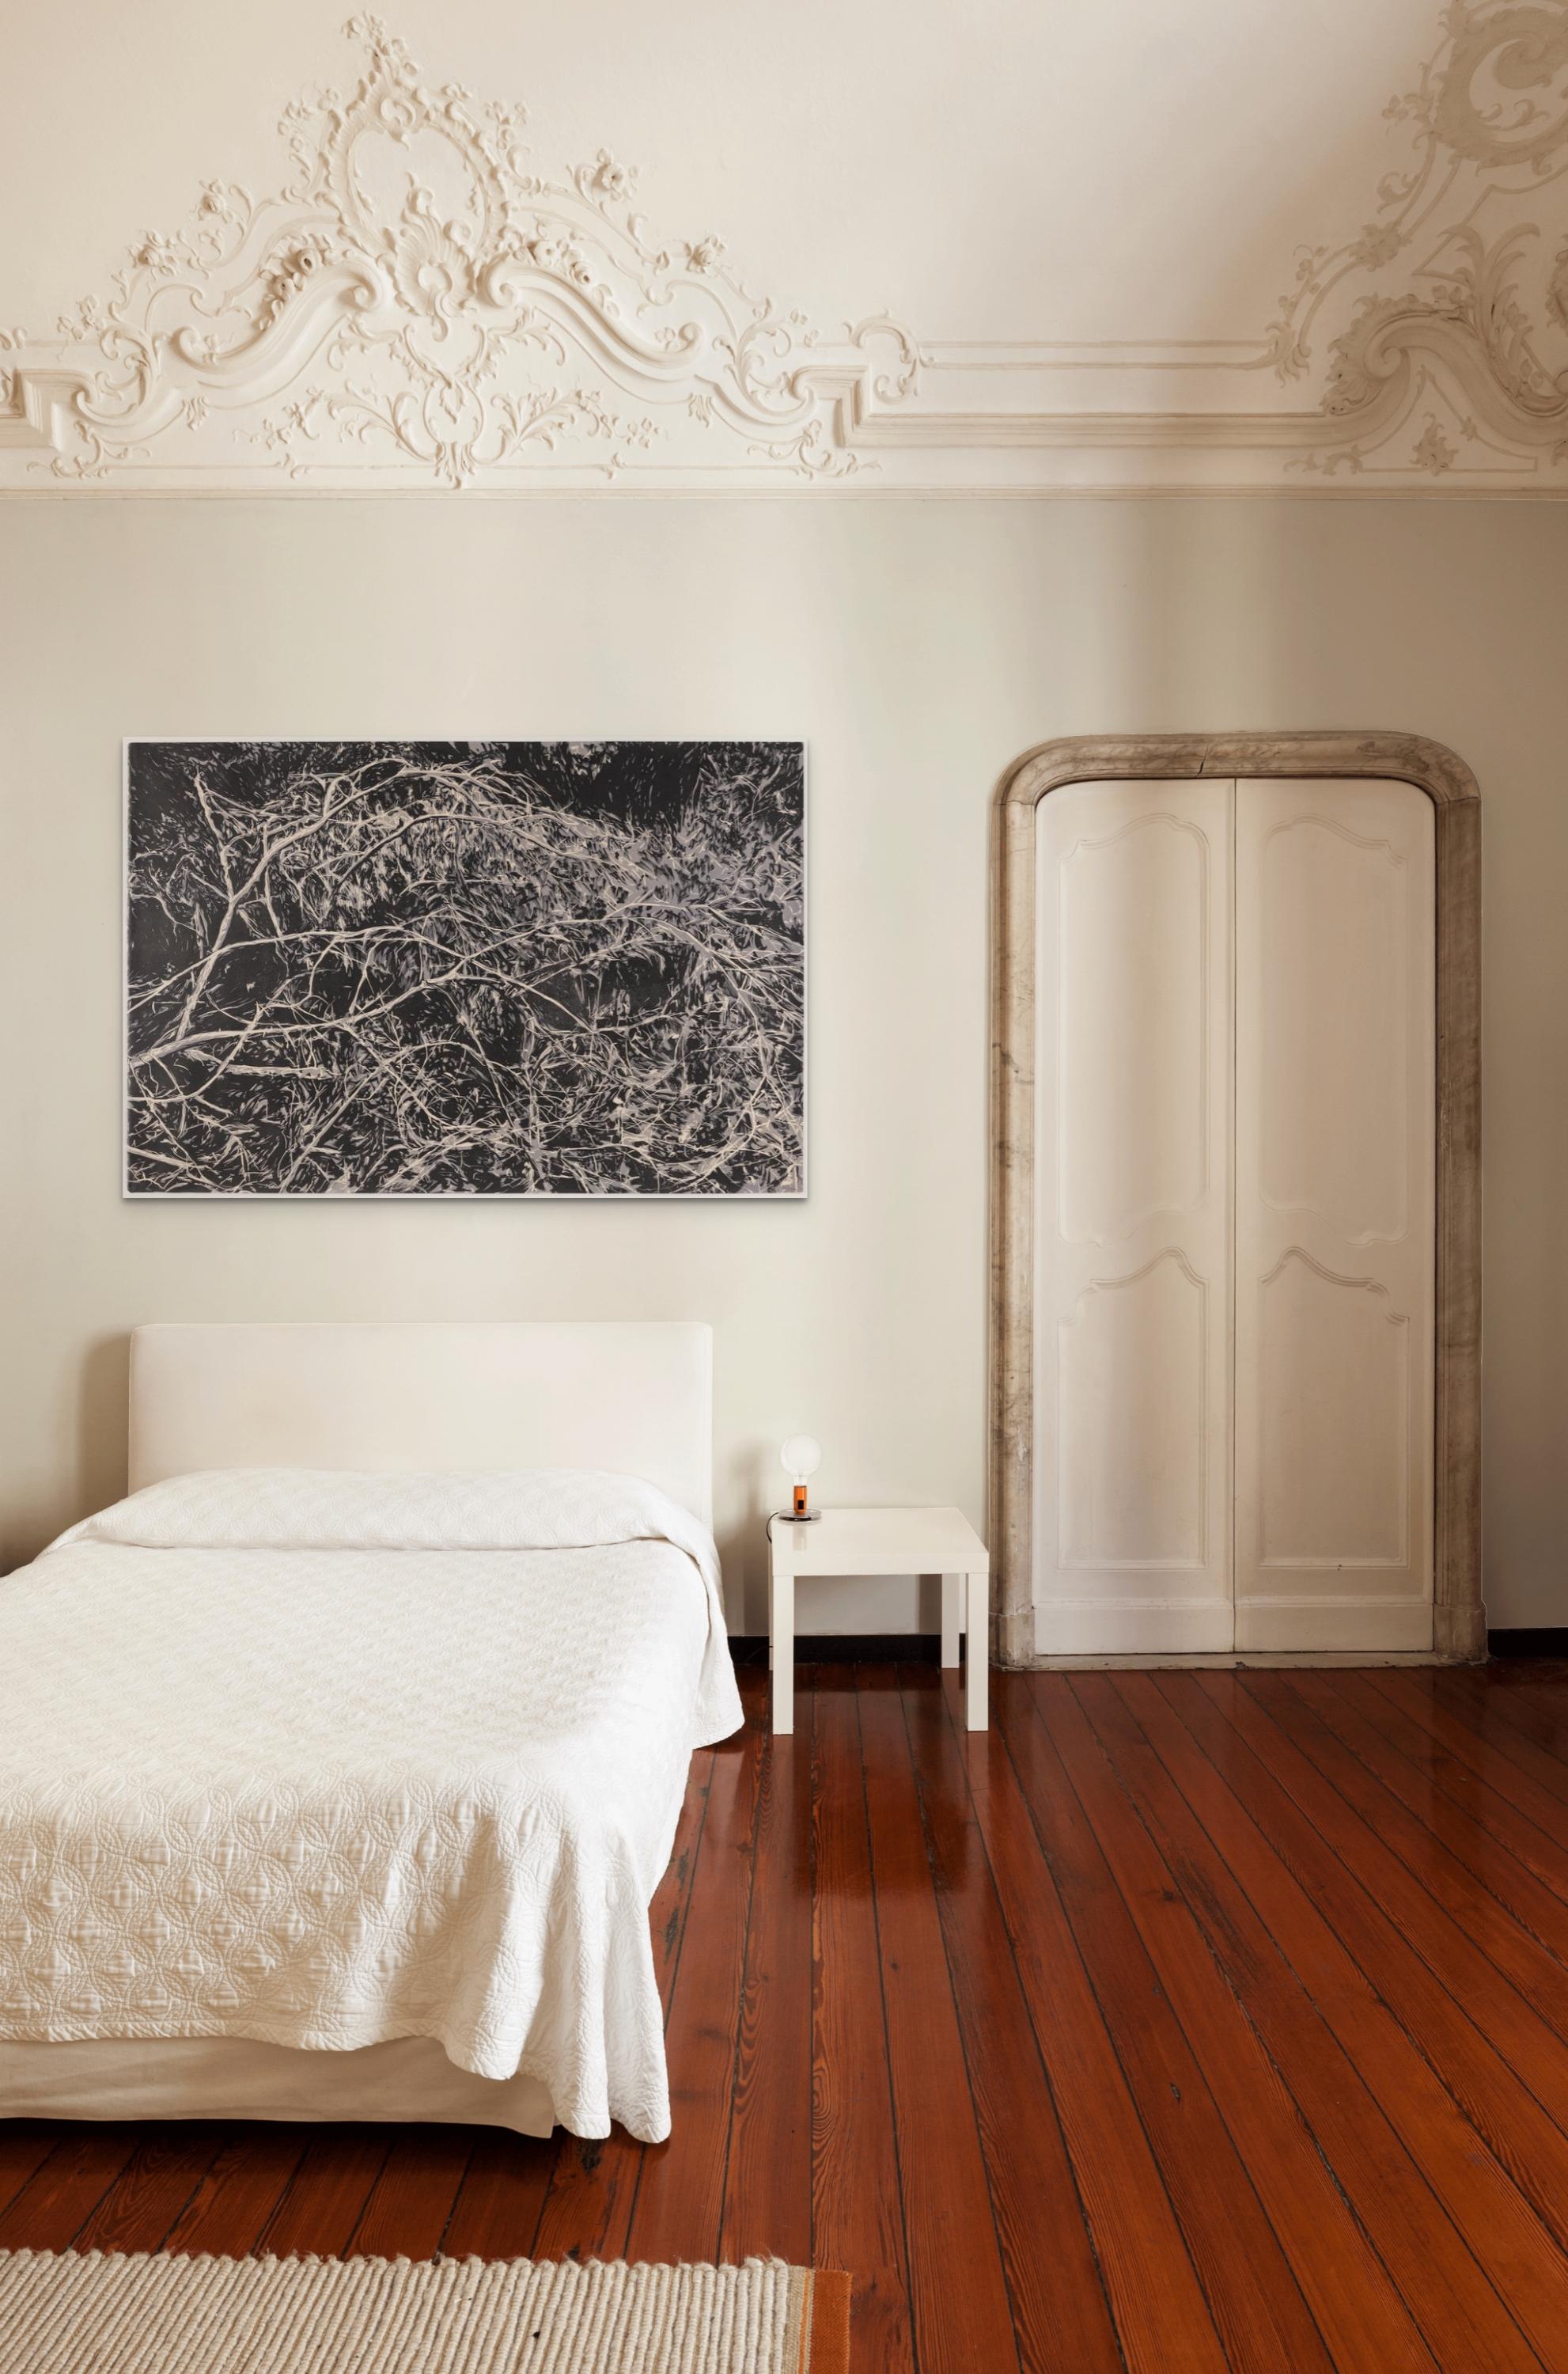 Whirl - Large Print of Tangled Branches with Foliage in Black and Gray For Sale 3